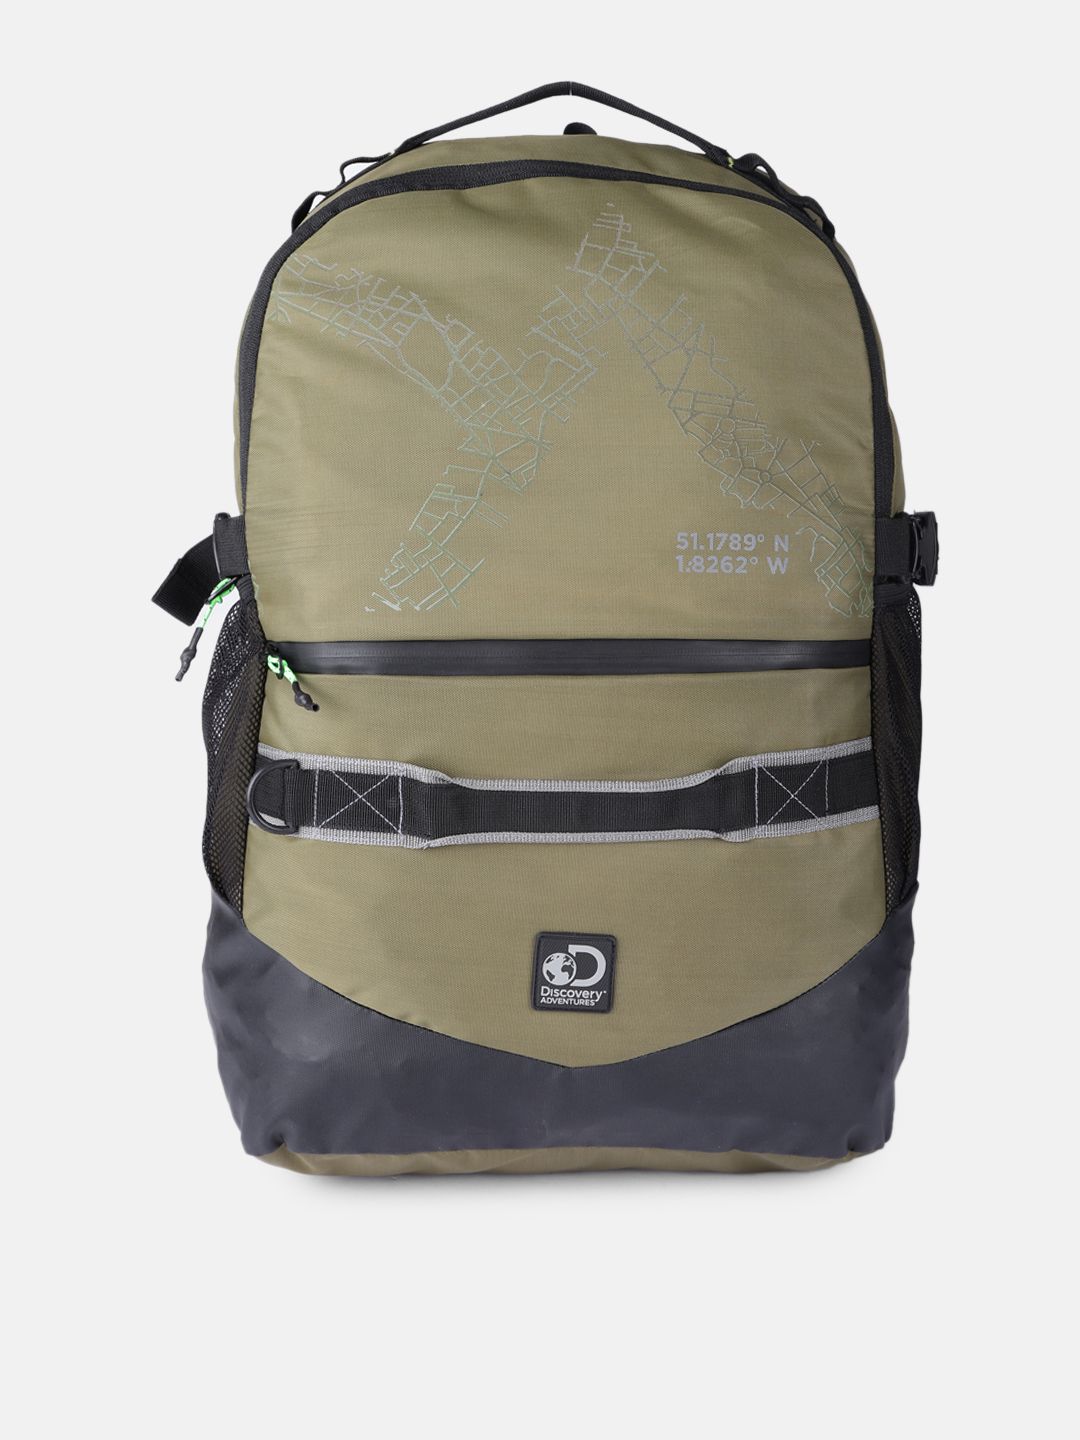 Roadster Unisex Olive Green Discovery Trek Laptop Backpack with Compression Straps Price in India